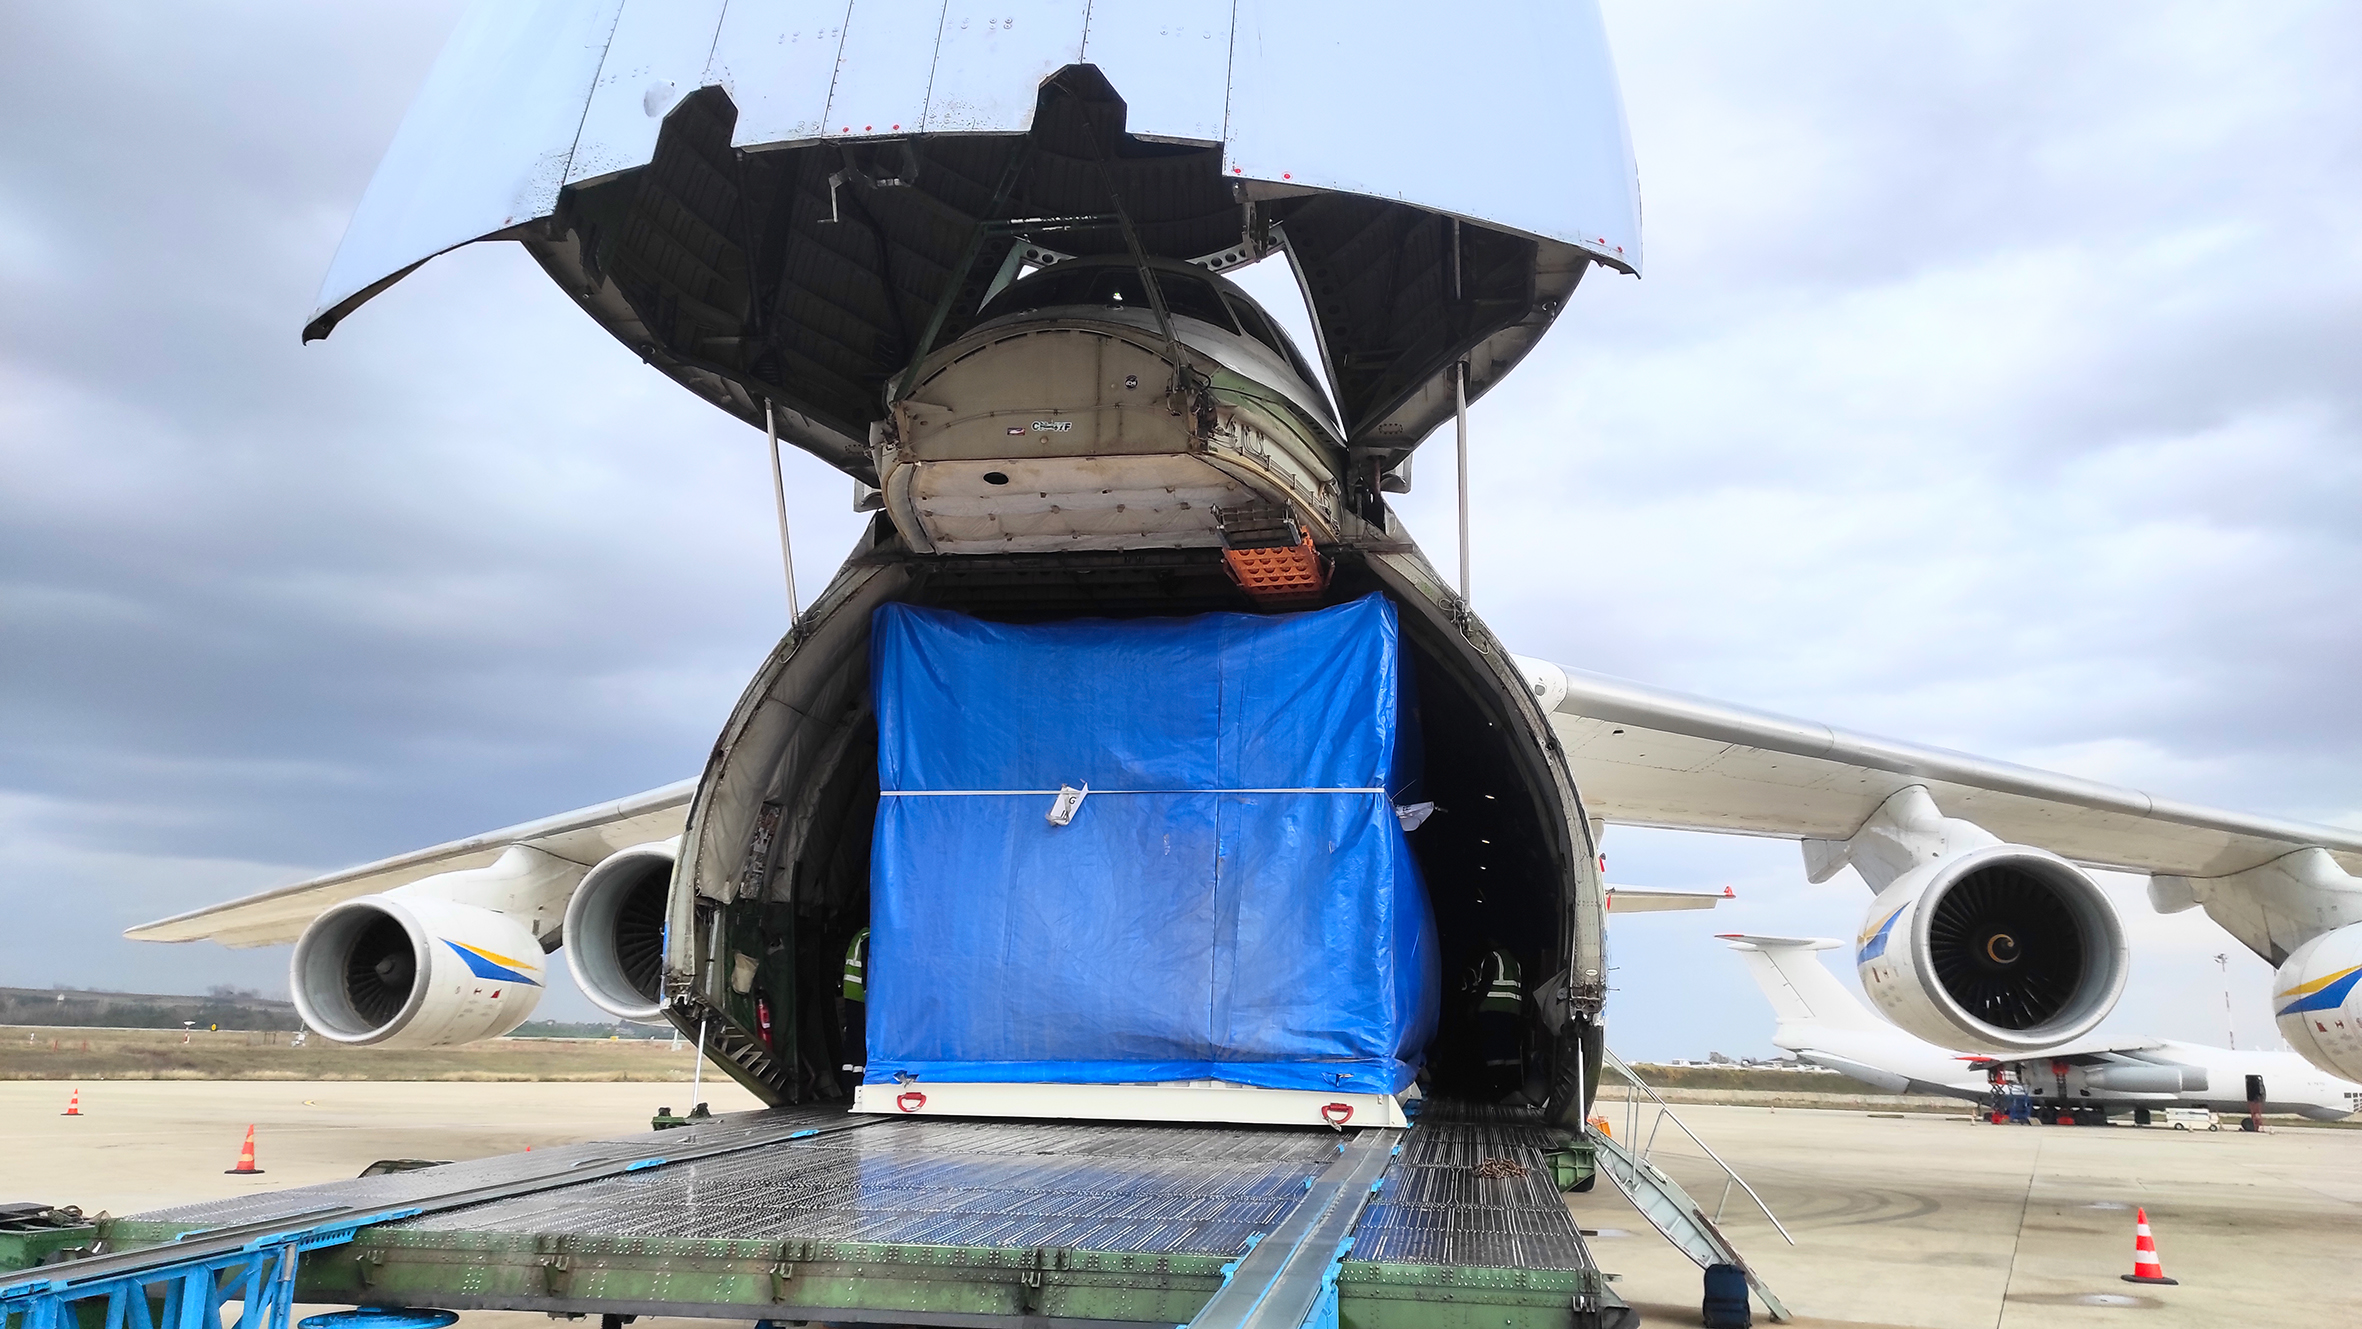 Project cargo flown in for a German LNG import facility